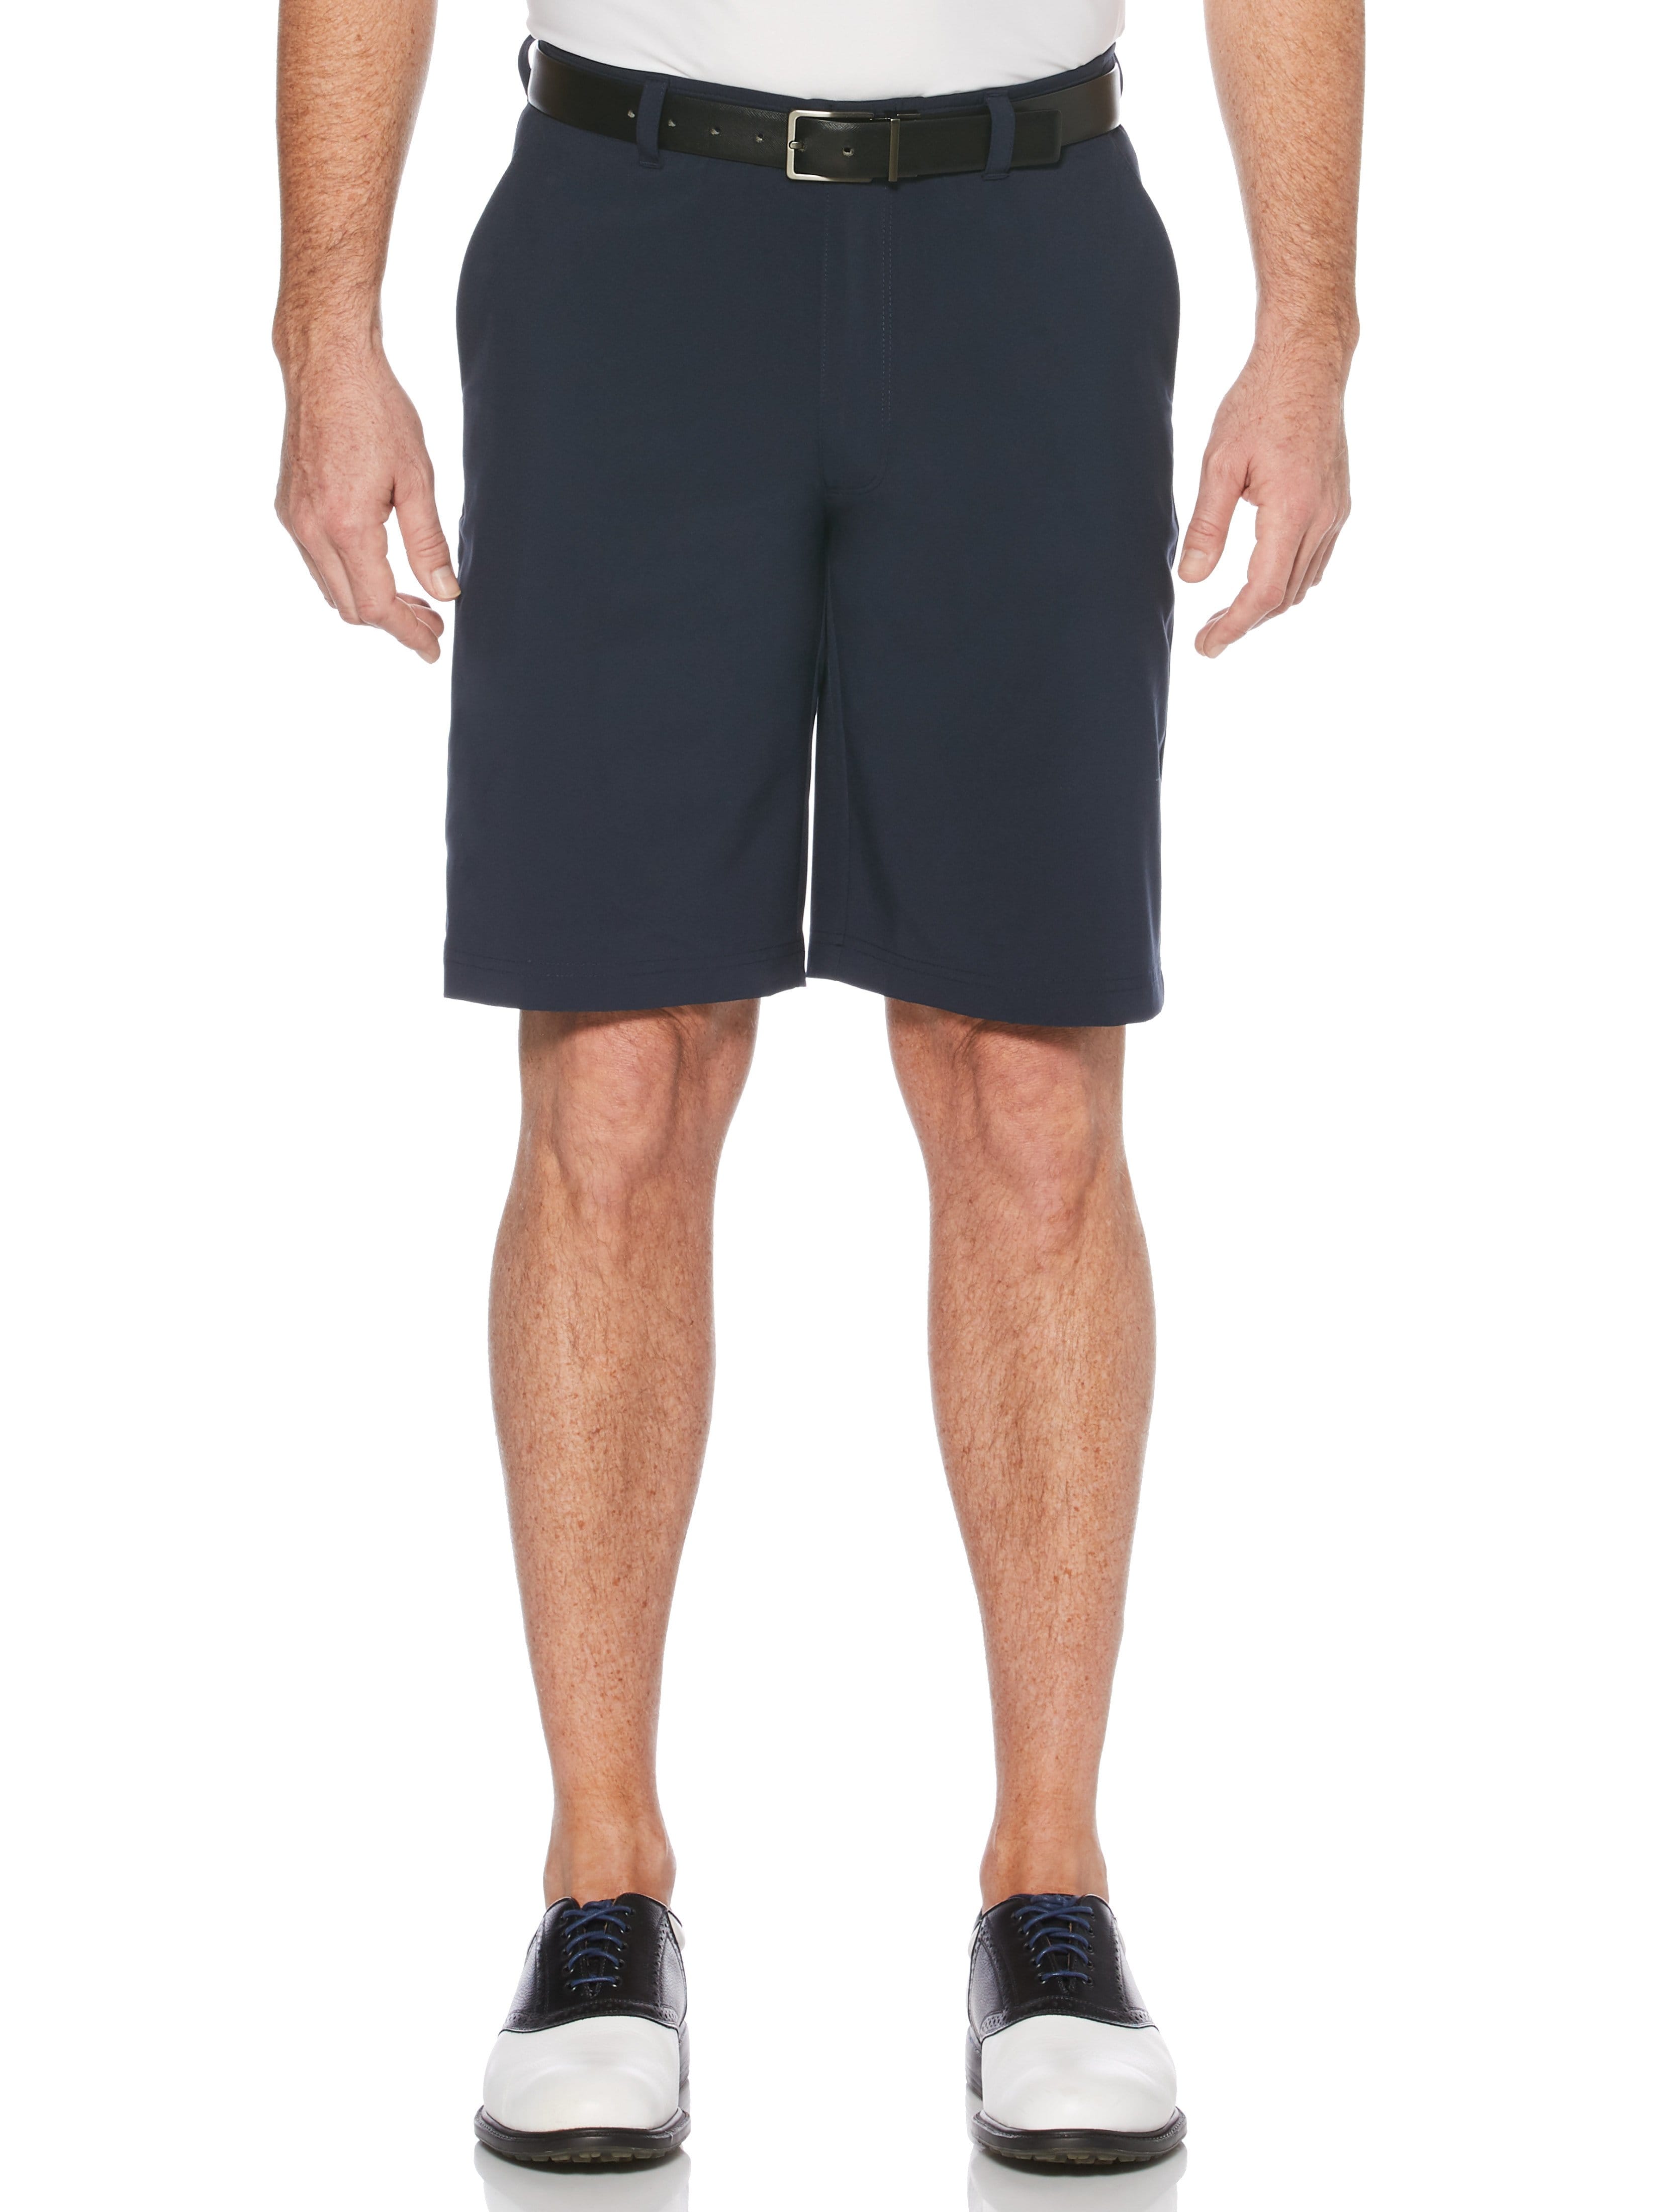 Jack Nicklaus Mens Flat Front Solid Golf Shorts w/ Active Waistband and Media Pocket, Size 38, Classic Navy Blue, Polyester/Elastane